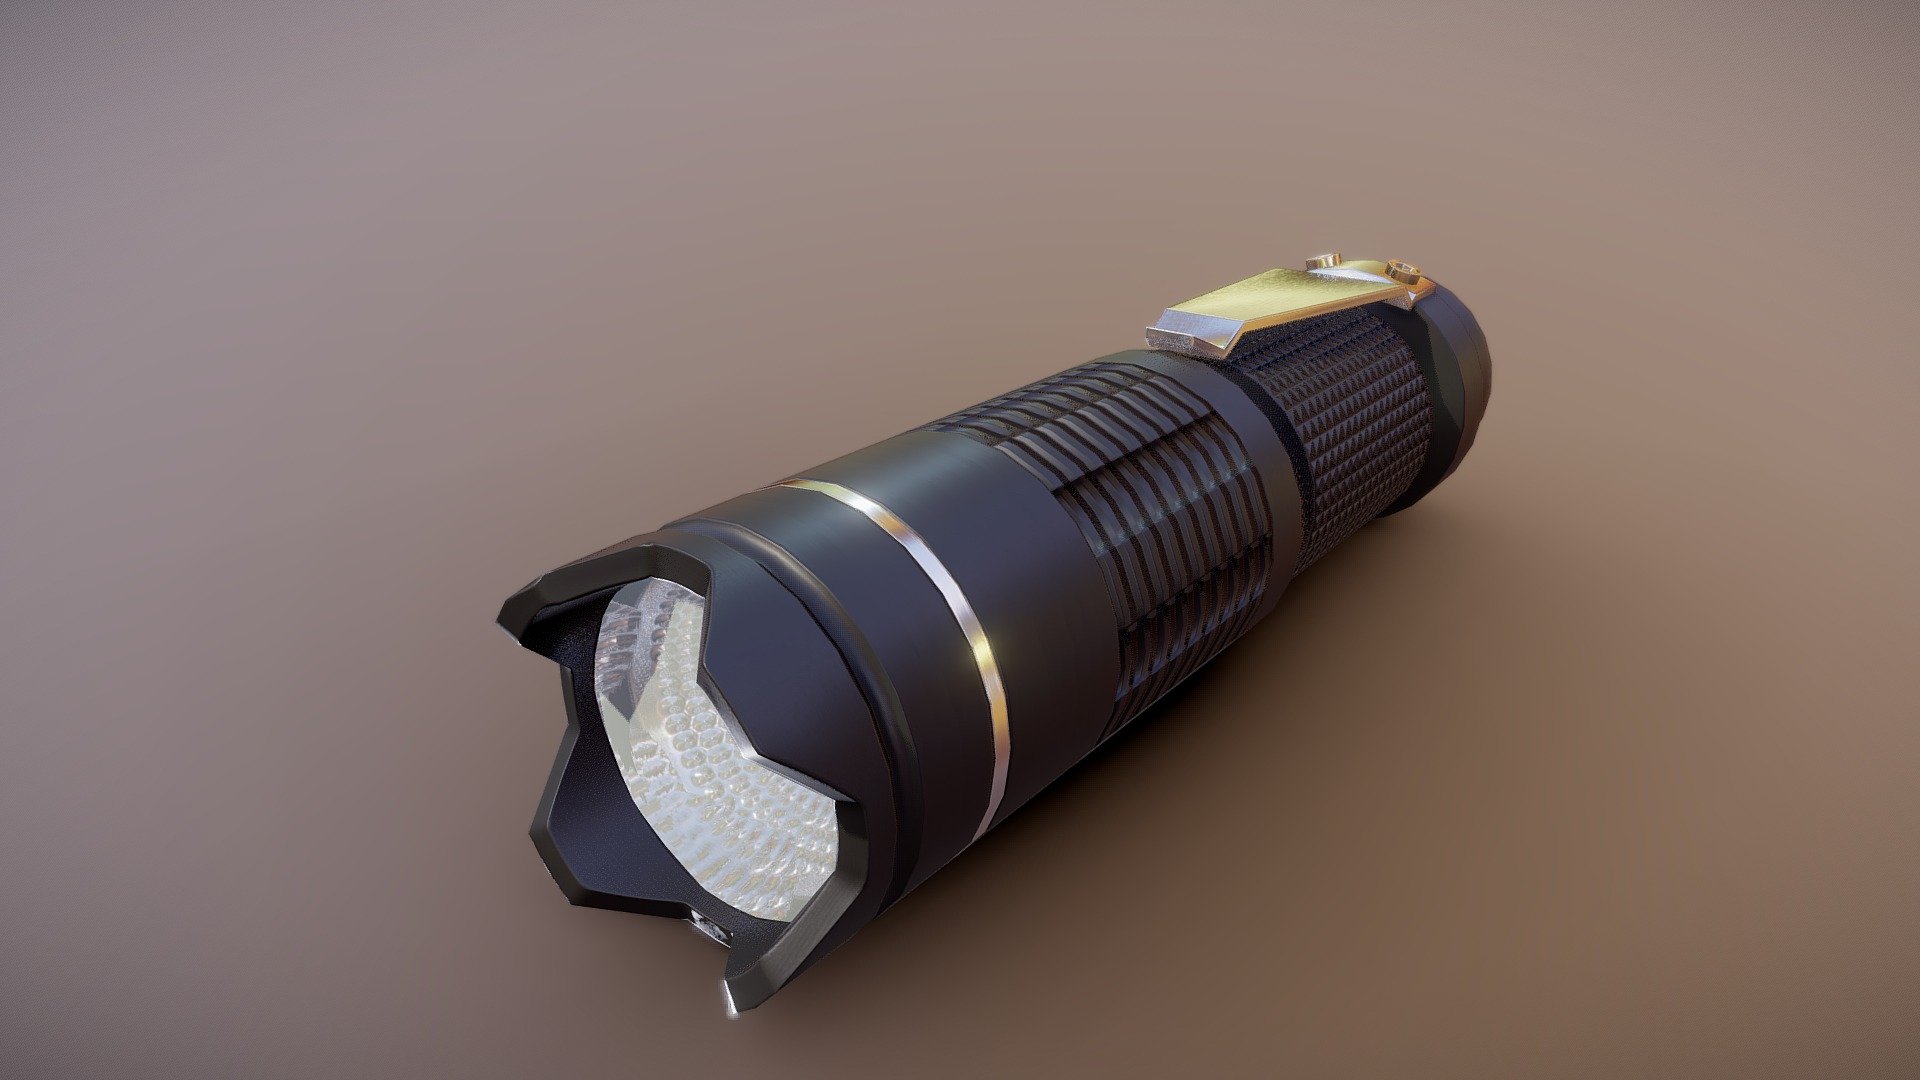 Flashlight game-ready asset, created and textured in Blender and GIMP. Tested using Blender 2.8 EEVEE real-time render engine and in Unity.
The model contains 1041 and looks nice on closeups 3d model